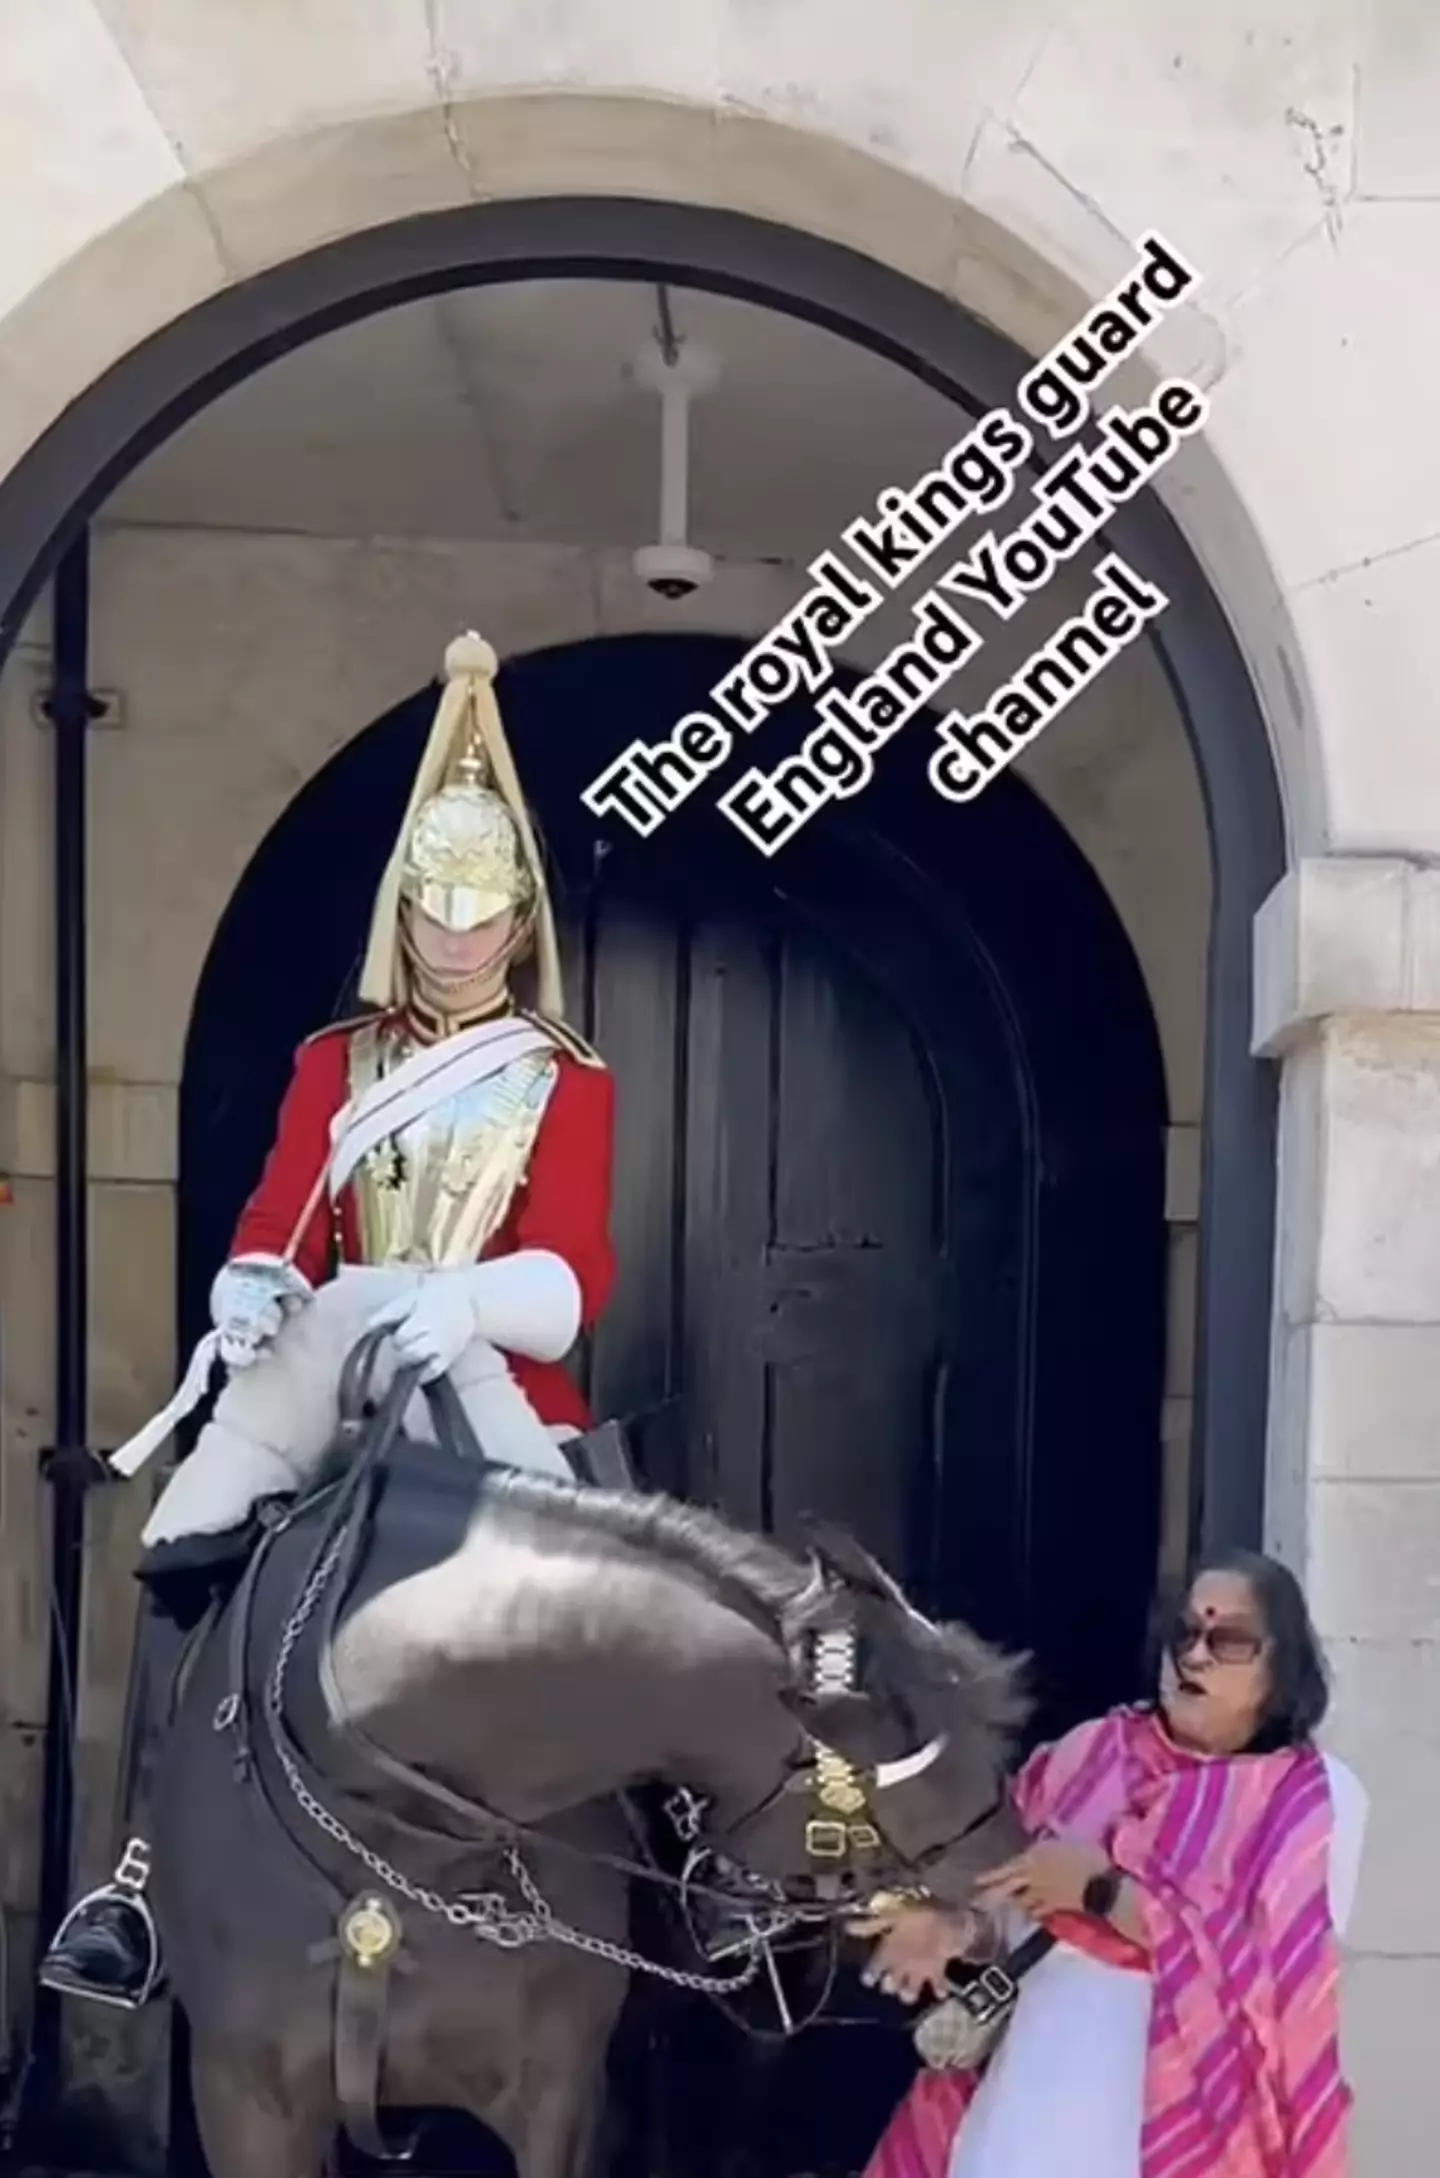 The horse tried to bite the tourist. (YouTube / LondonWalk100k)